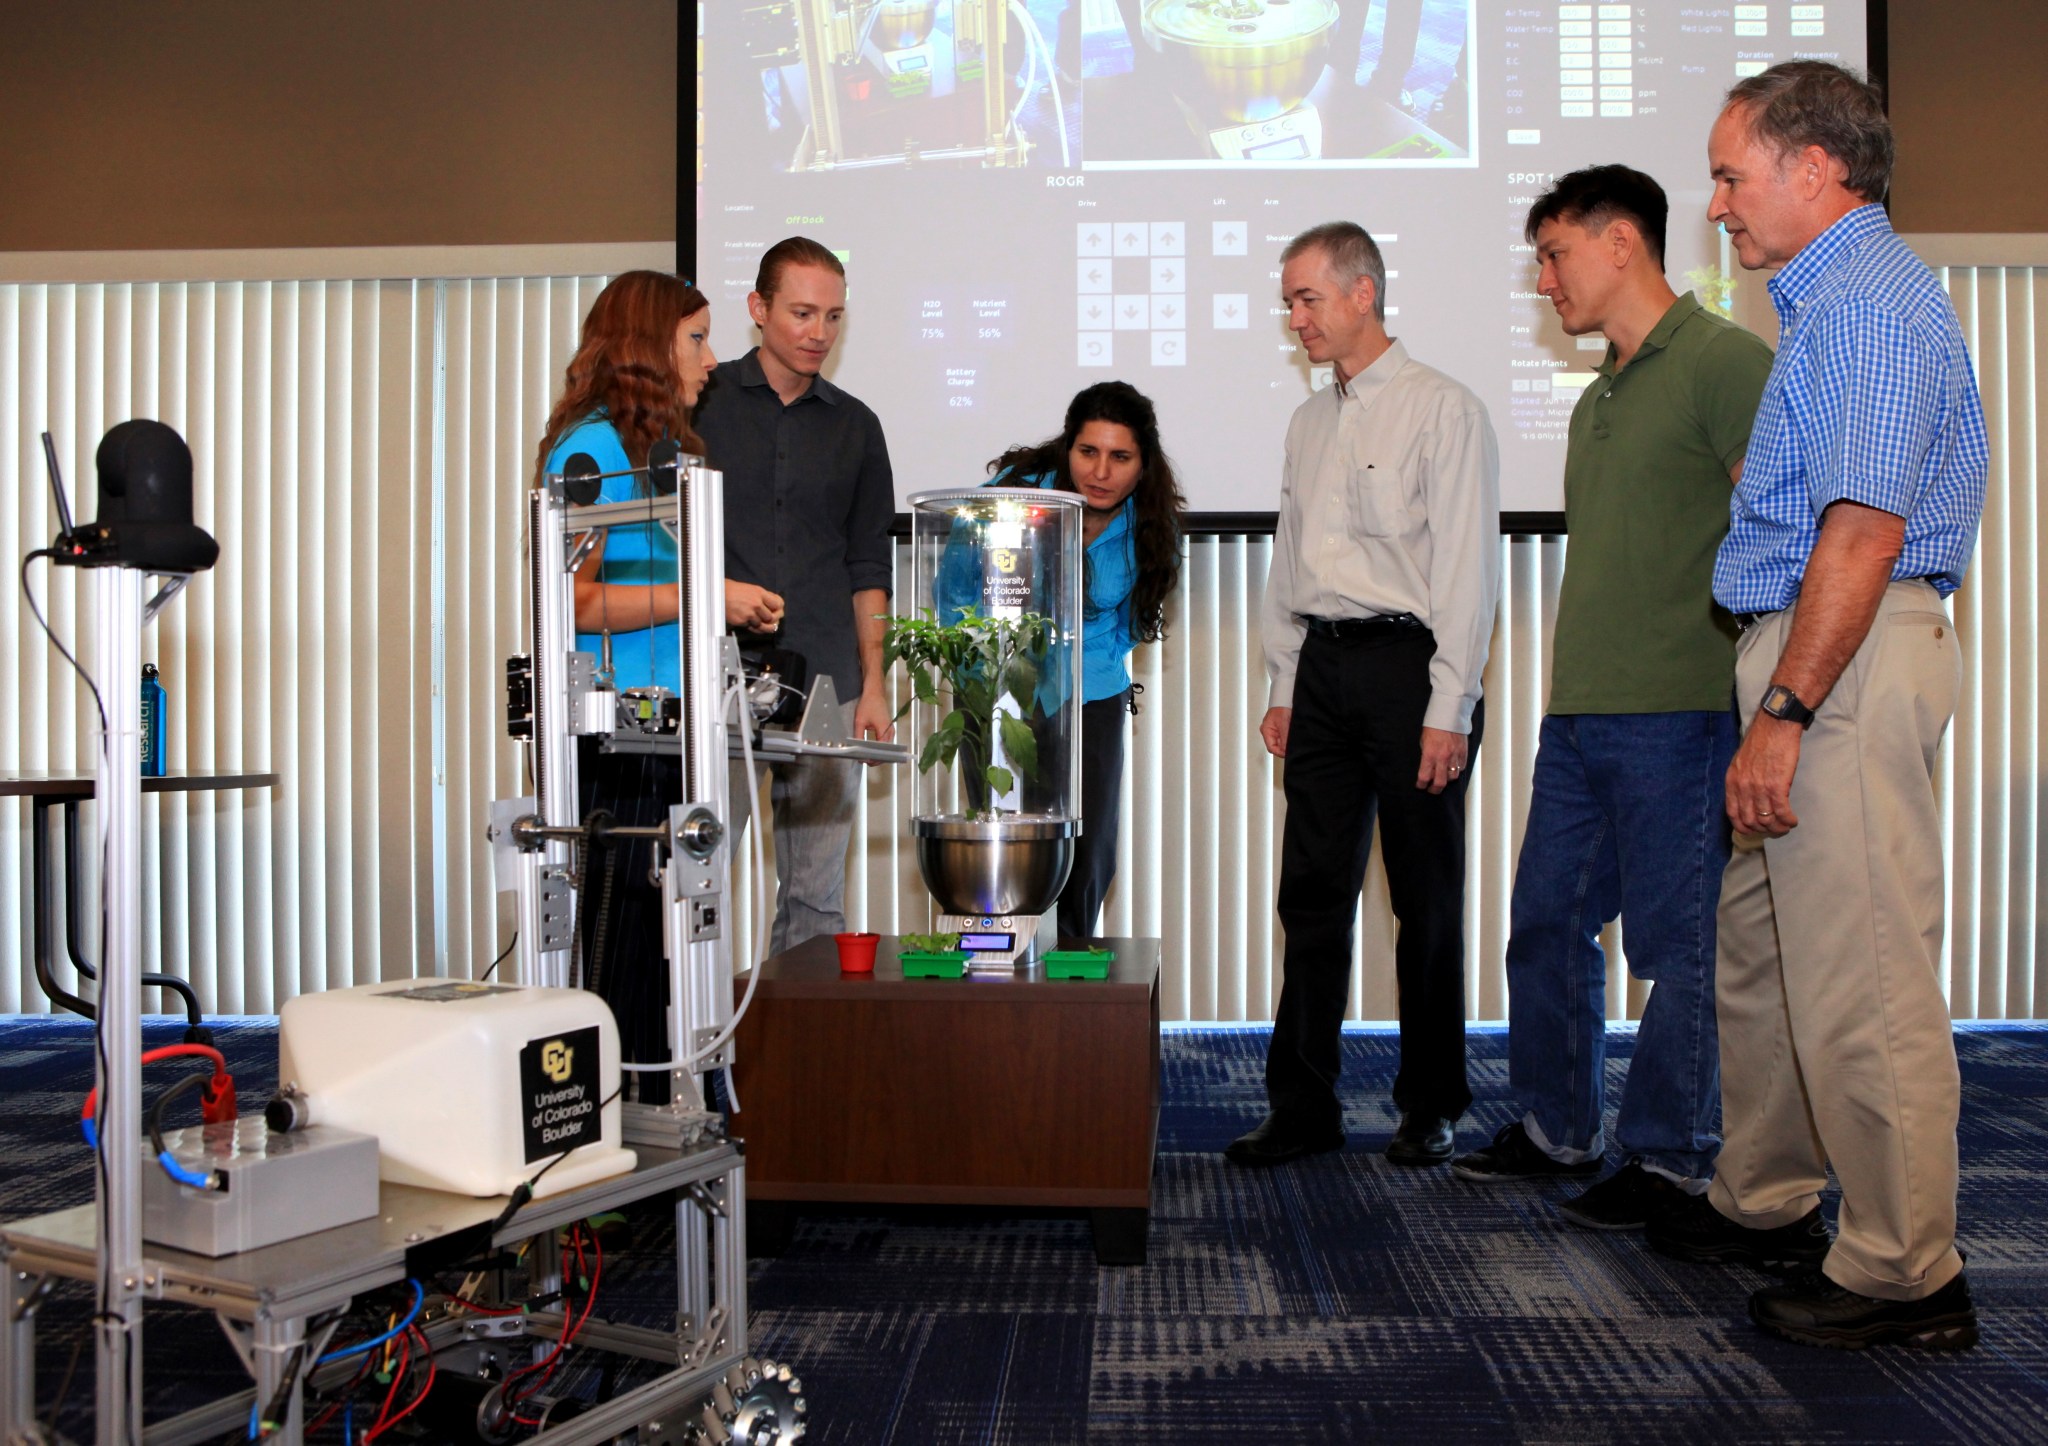 University of Colorado Boulder graduate students Heather Hava, far left, and Daniel Zukowski, second from the left, describe a computerized SmartPot, or SPOT, which could be used to grow plants in a deep-space habitat.